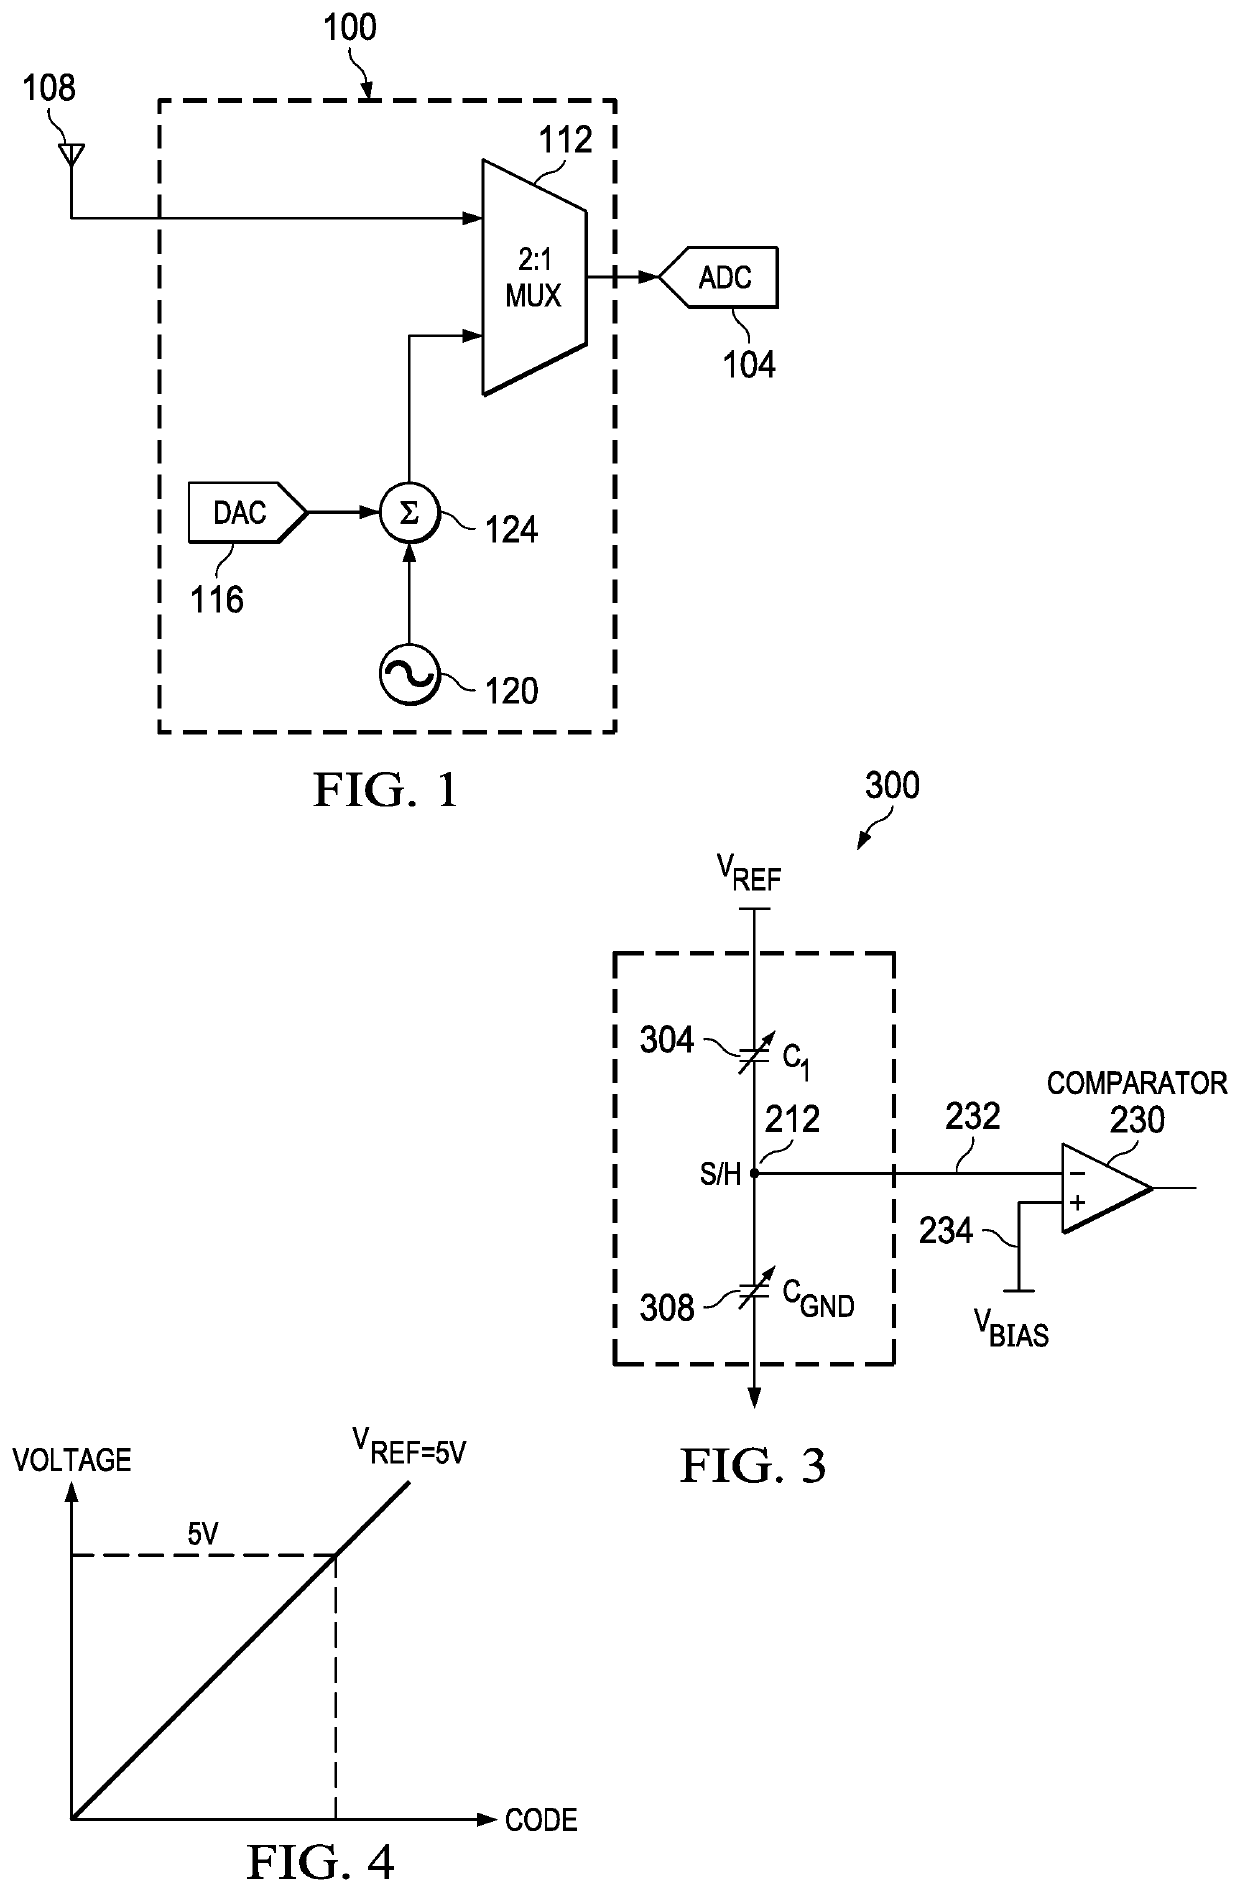 Analog to digital (A/D) converter with internal diagnostic circuit